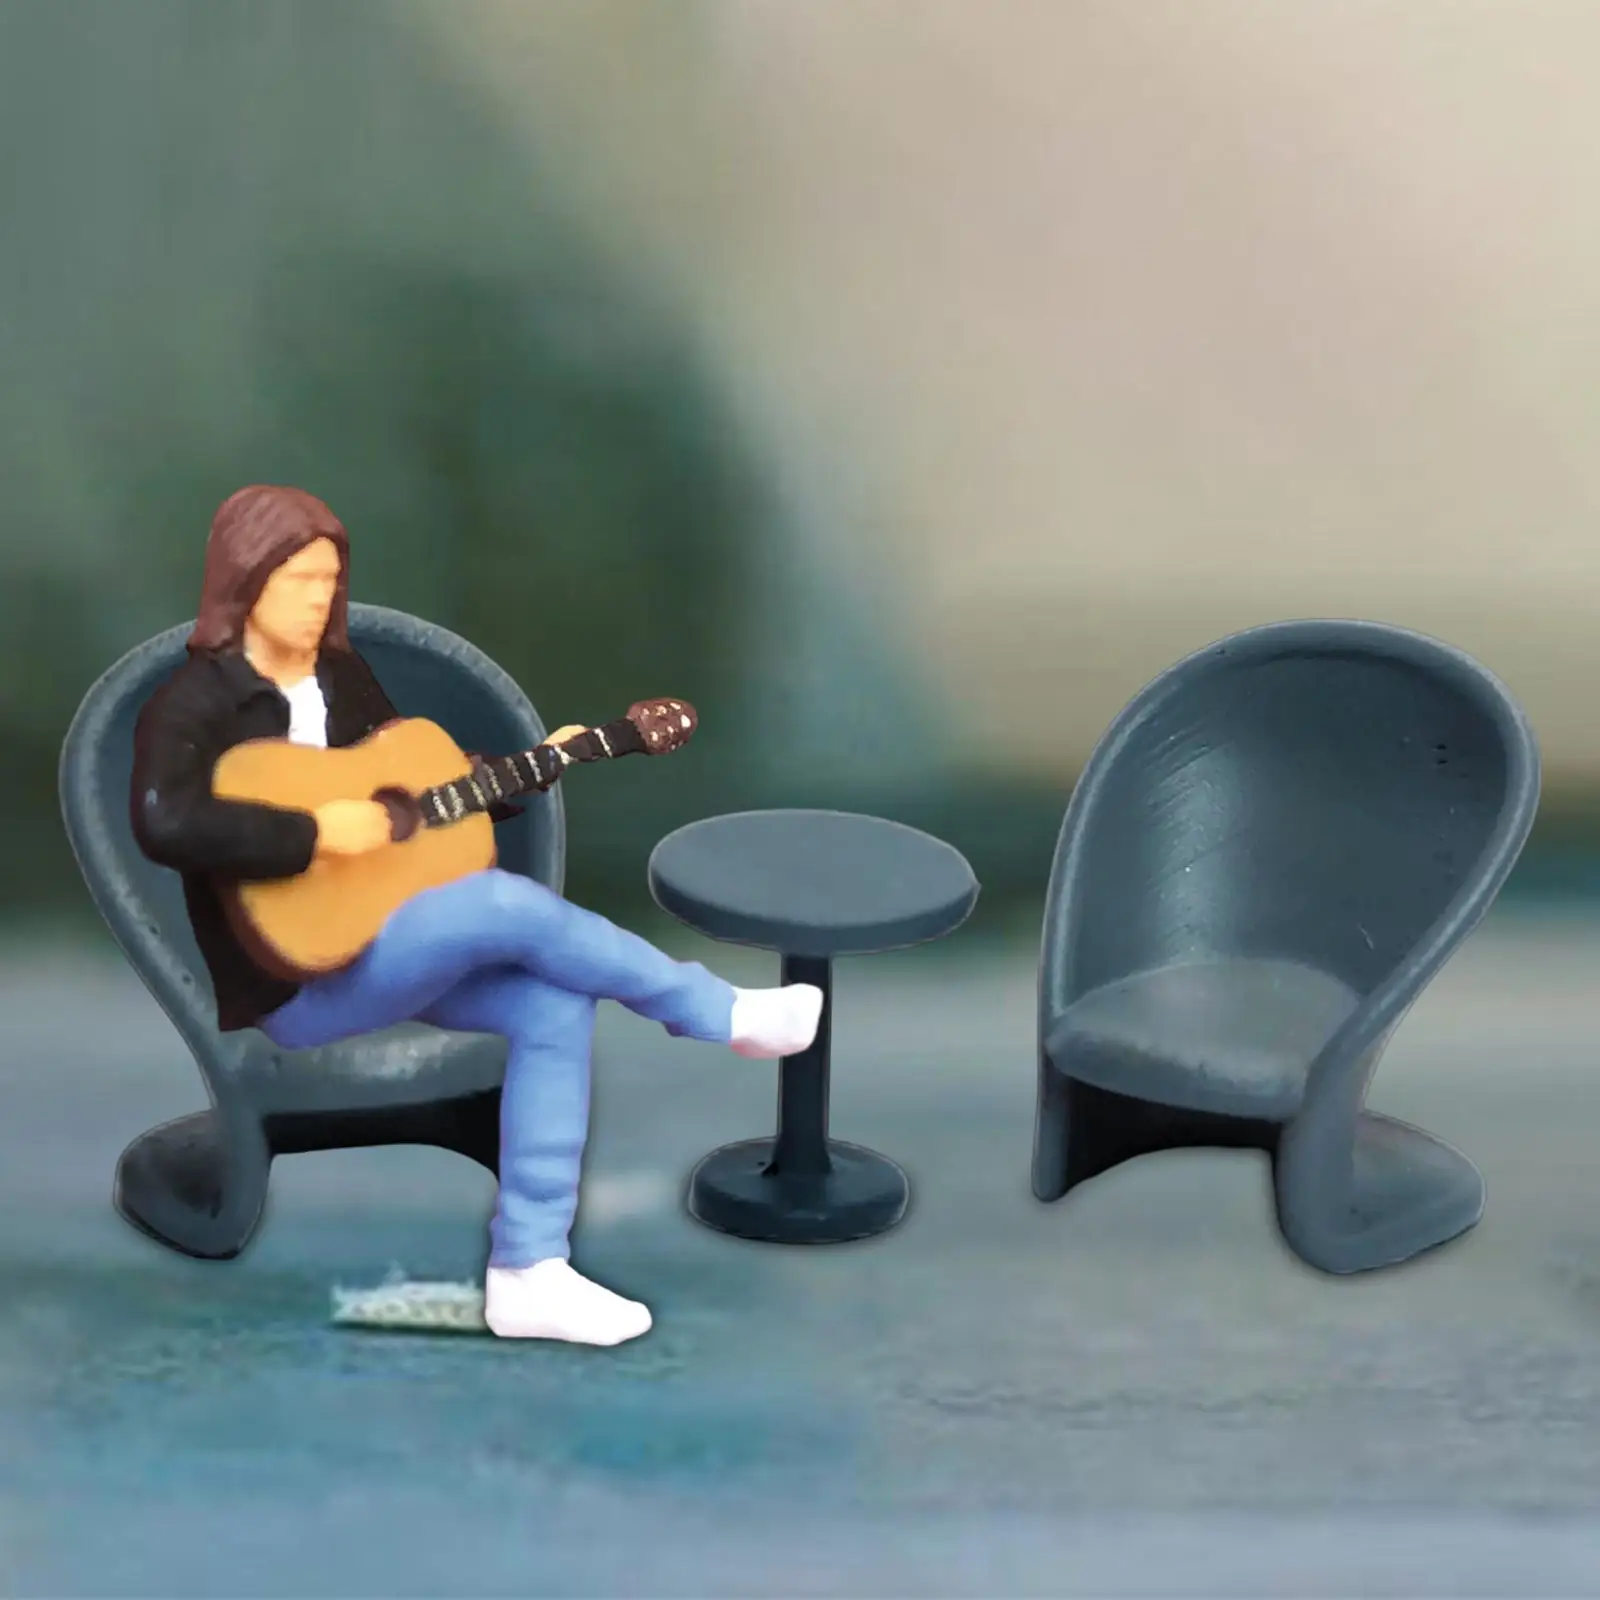 1/64 Scale Music Figurine Resin 1/64 Scale Band Figures for Micro Landscape Building Desktop Decoration Diorama Layout